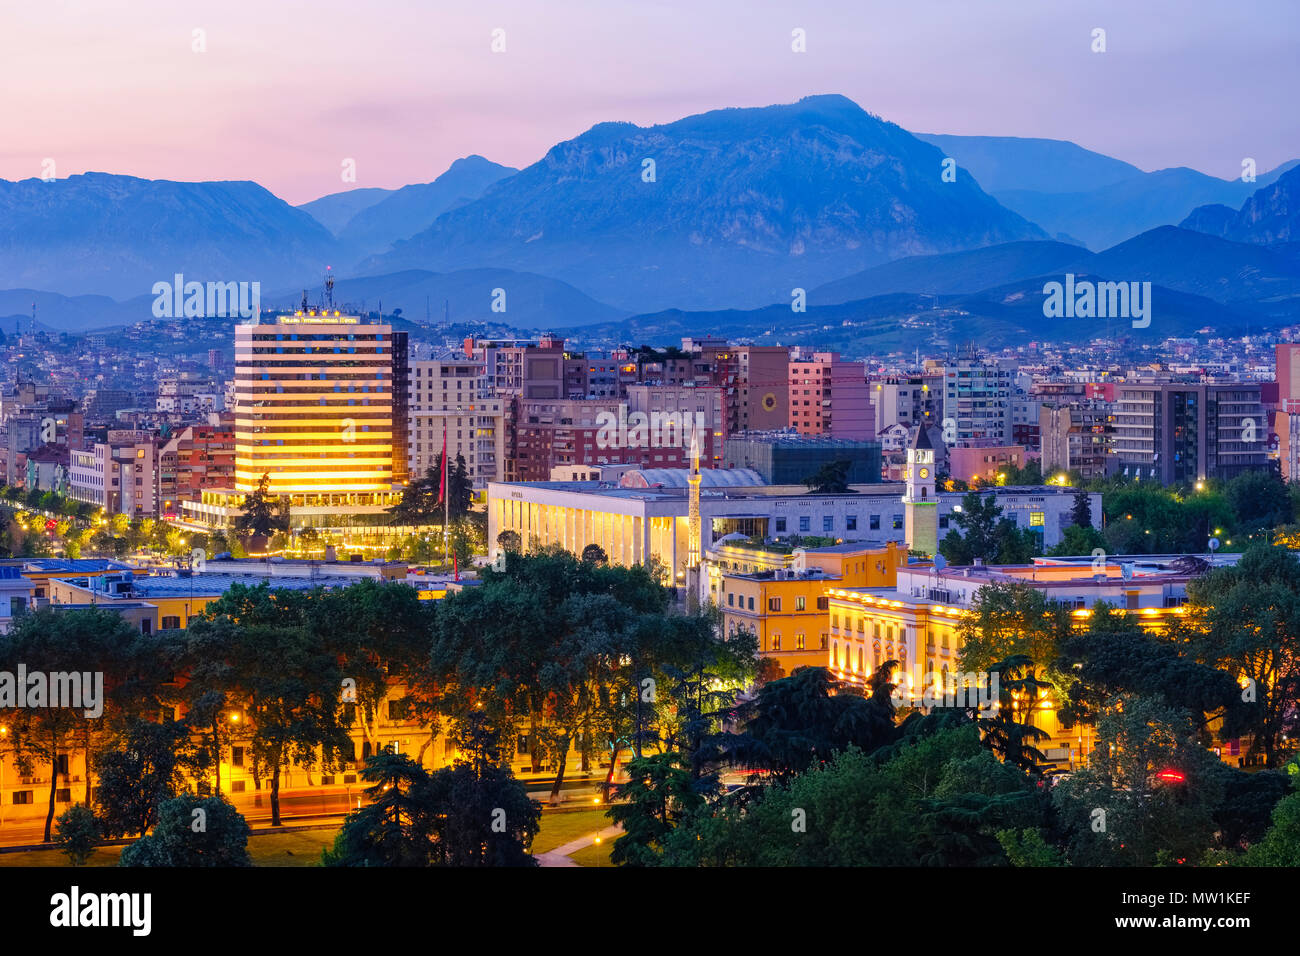 View of the city, city centre with Palace of Culture, Ethem-Bey Mosque and Clock Tower, mountains in the back, dusk, Tirana Stock Photo